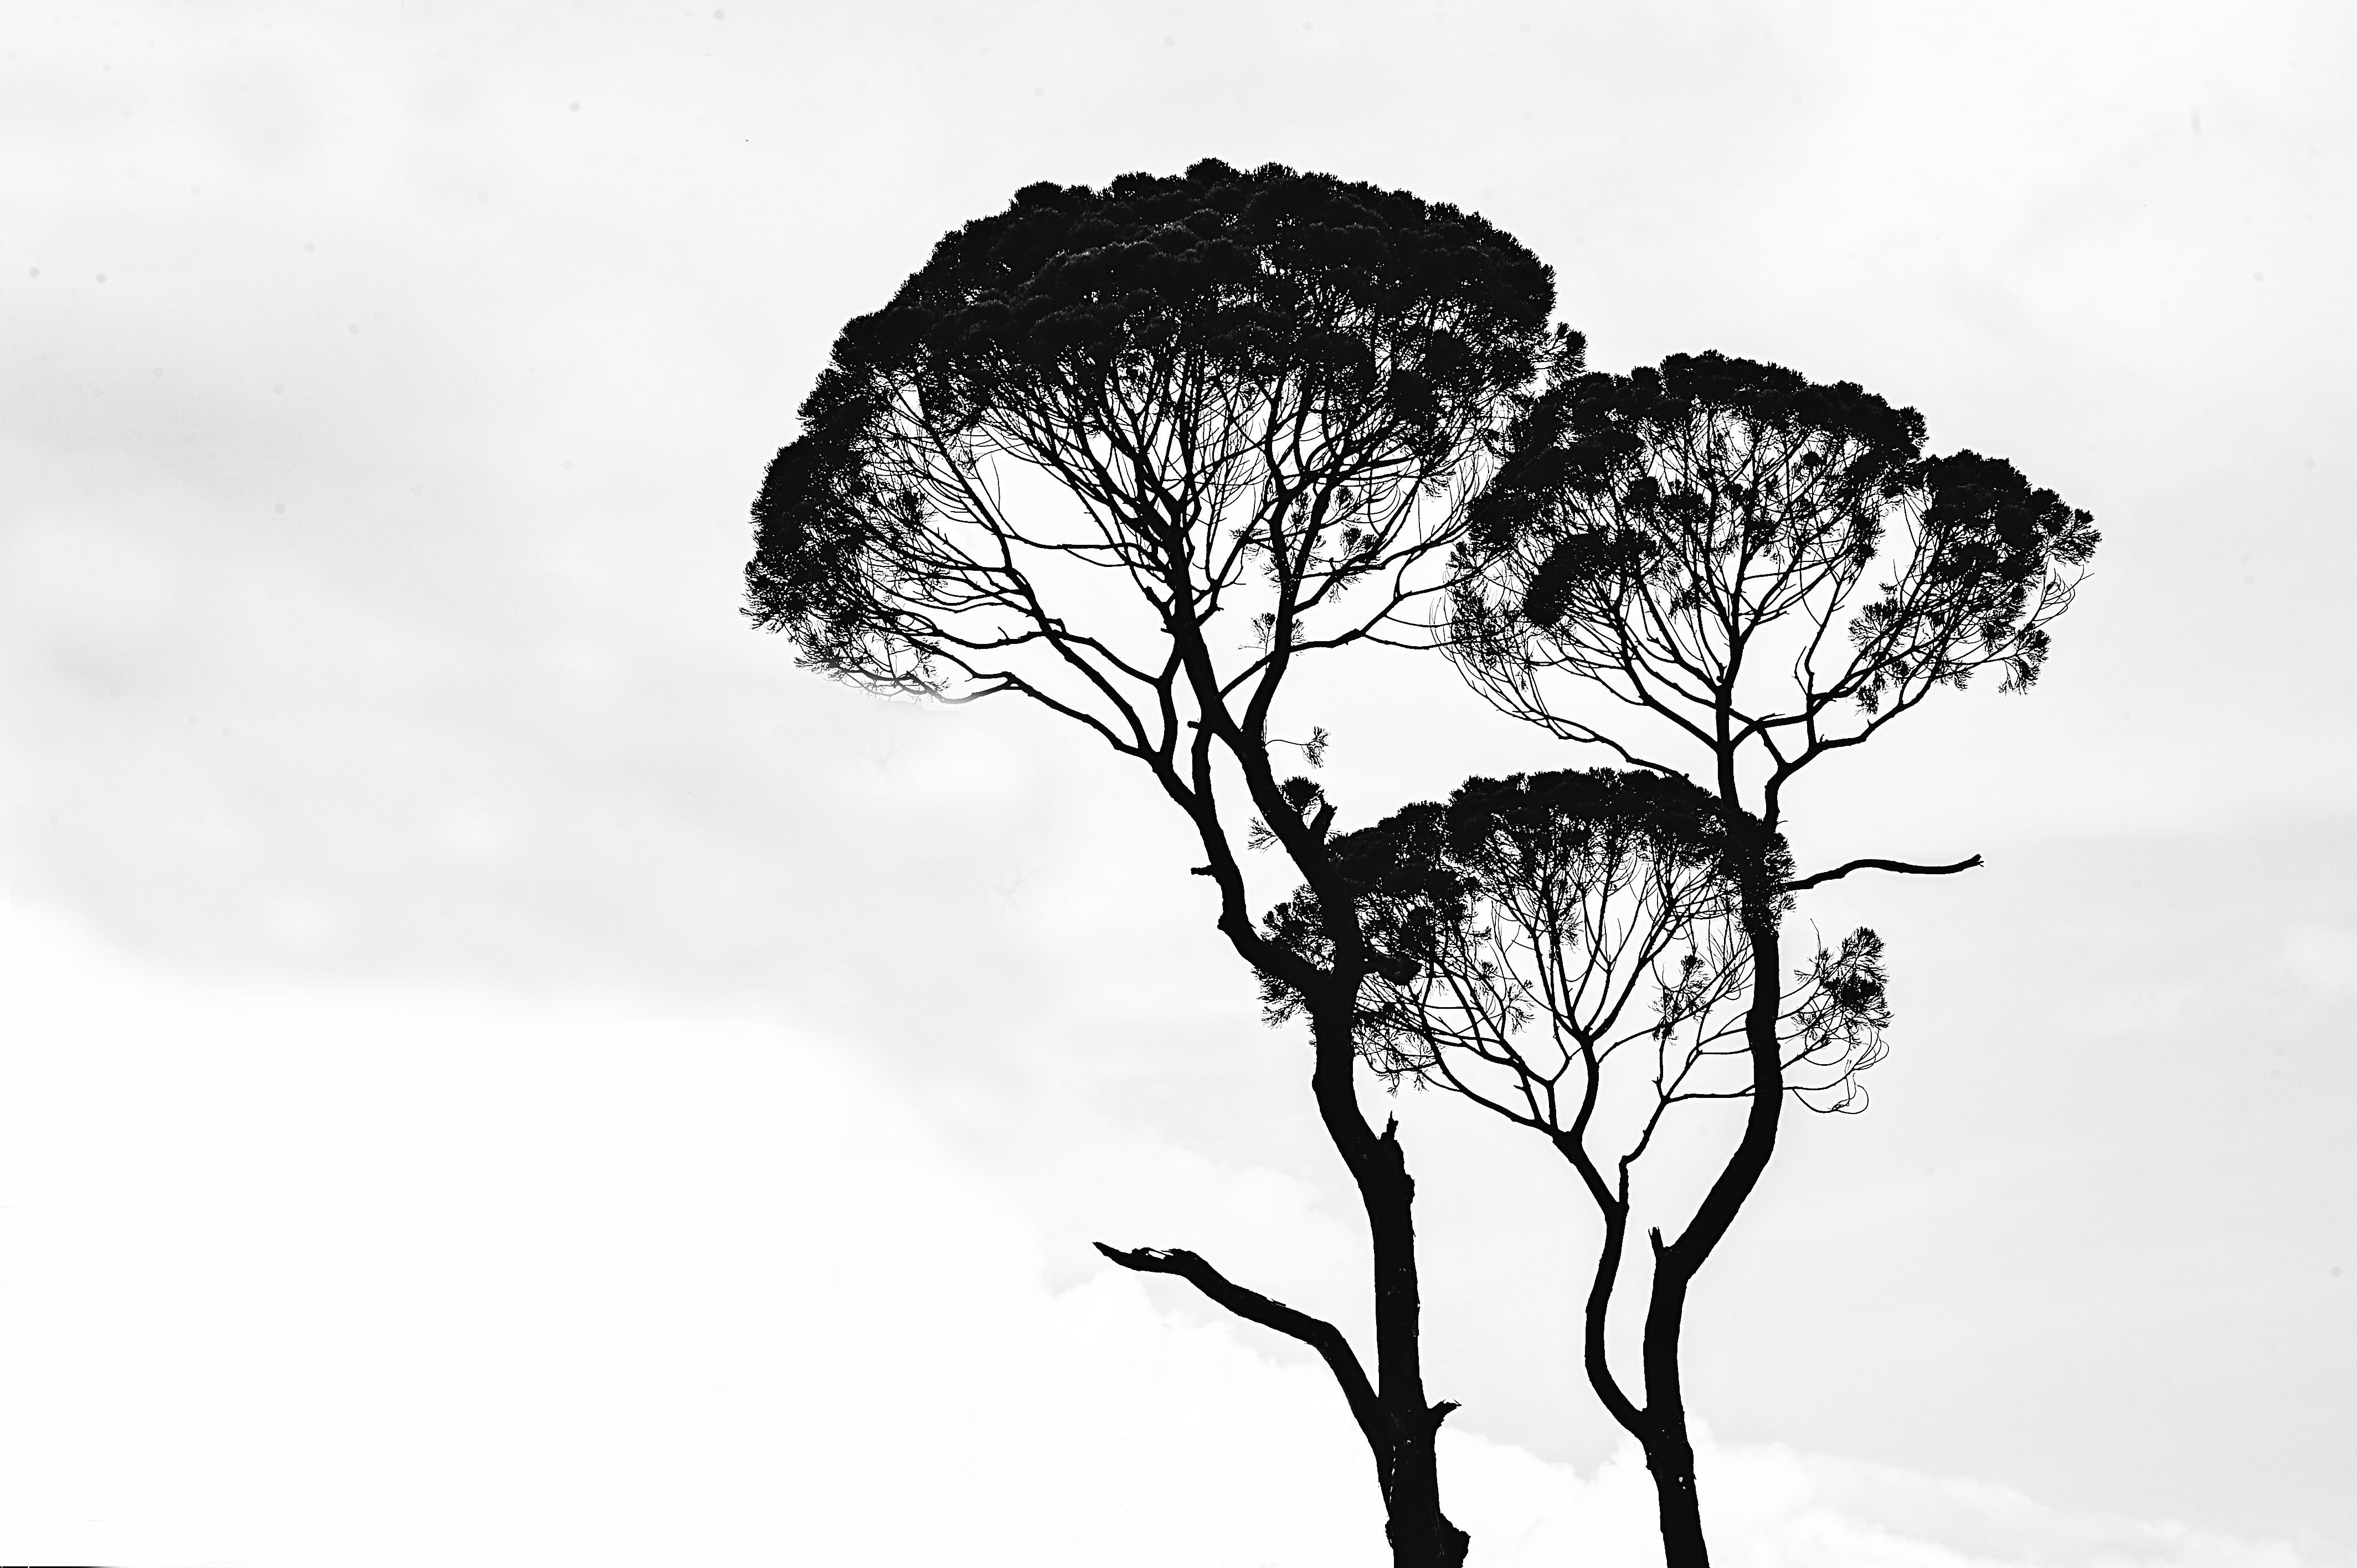 4256x2832 Free Photo: Silhouette Photo Of Trees Art, Black And White on Wal...